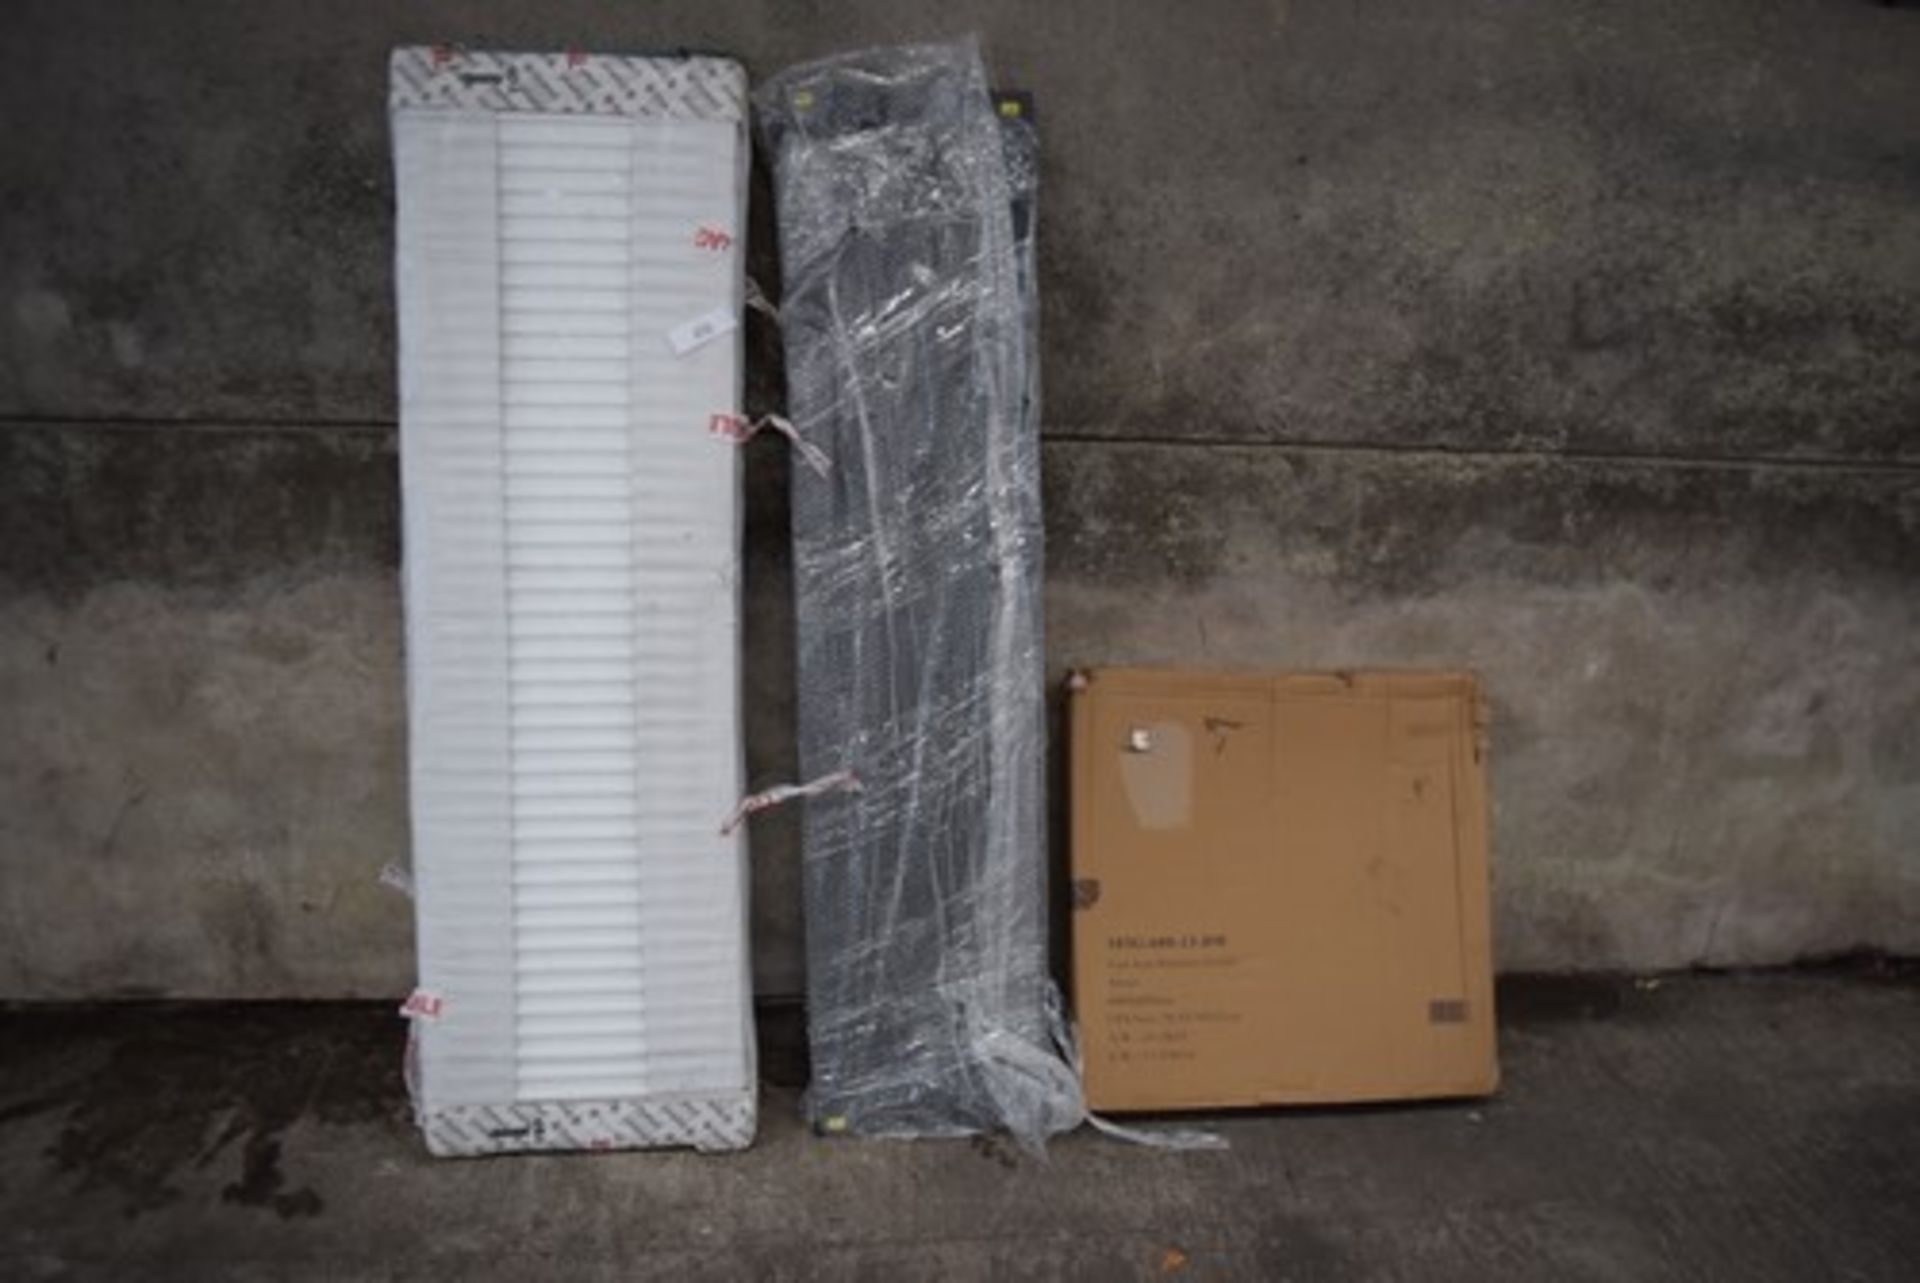 1 x NRG 600 x 605mm cast iron radiator, together with 1 x Stelrad Softline compact 1600mm x 450mm